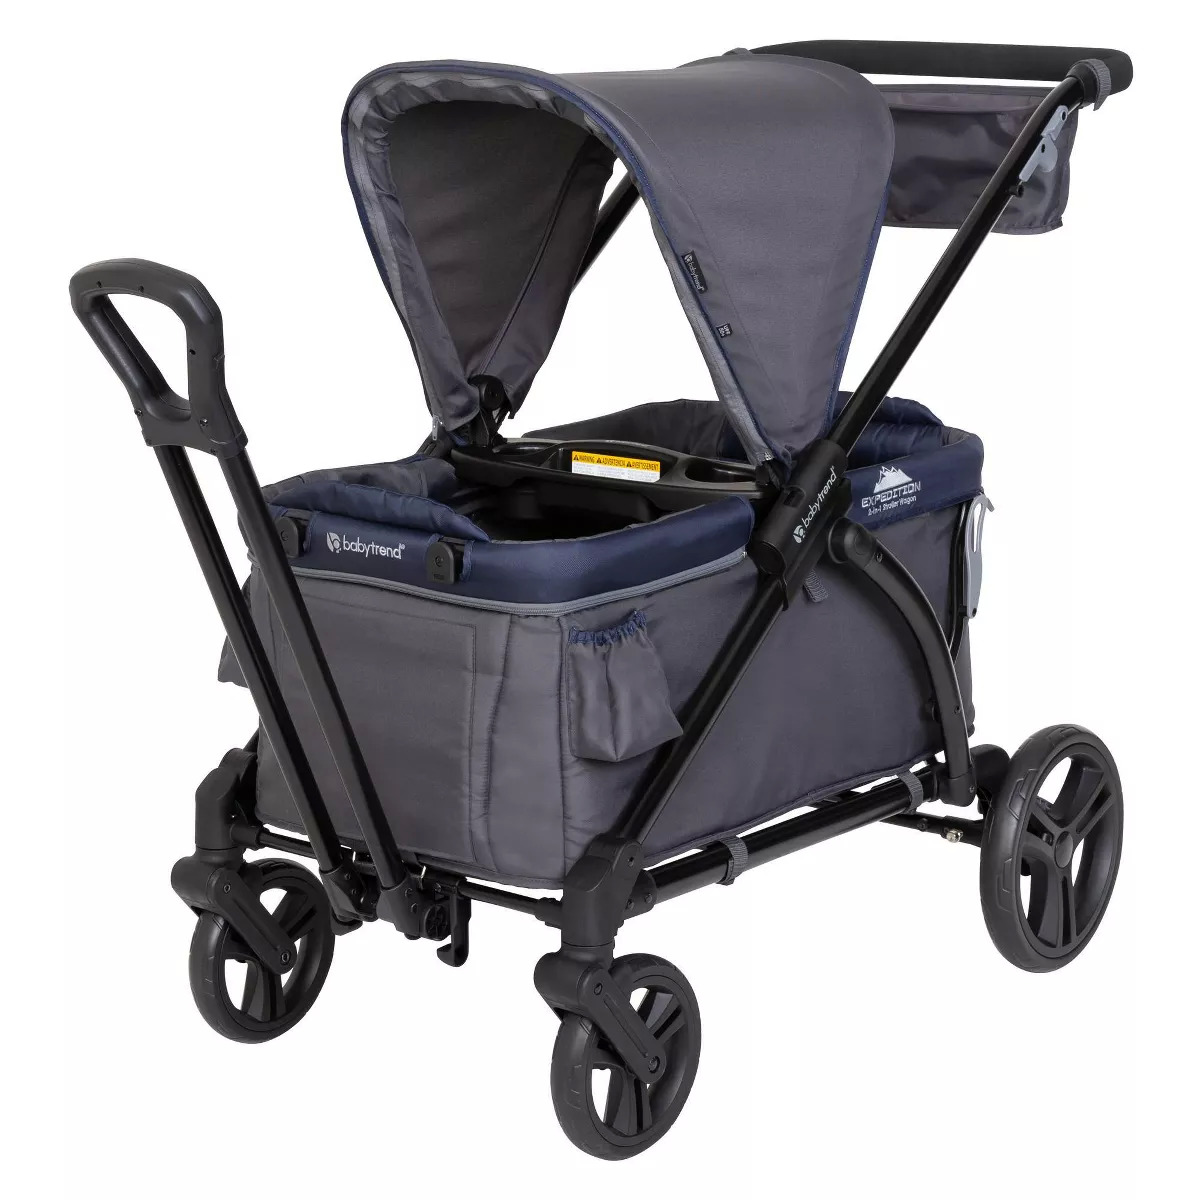 Target Baby Gear: Baby Trend Expedition 2-in-1 Stroller Wagon $120, Disney Baby Finding Nemo Sea of Activities Jumper $65 & More + Free Shipping